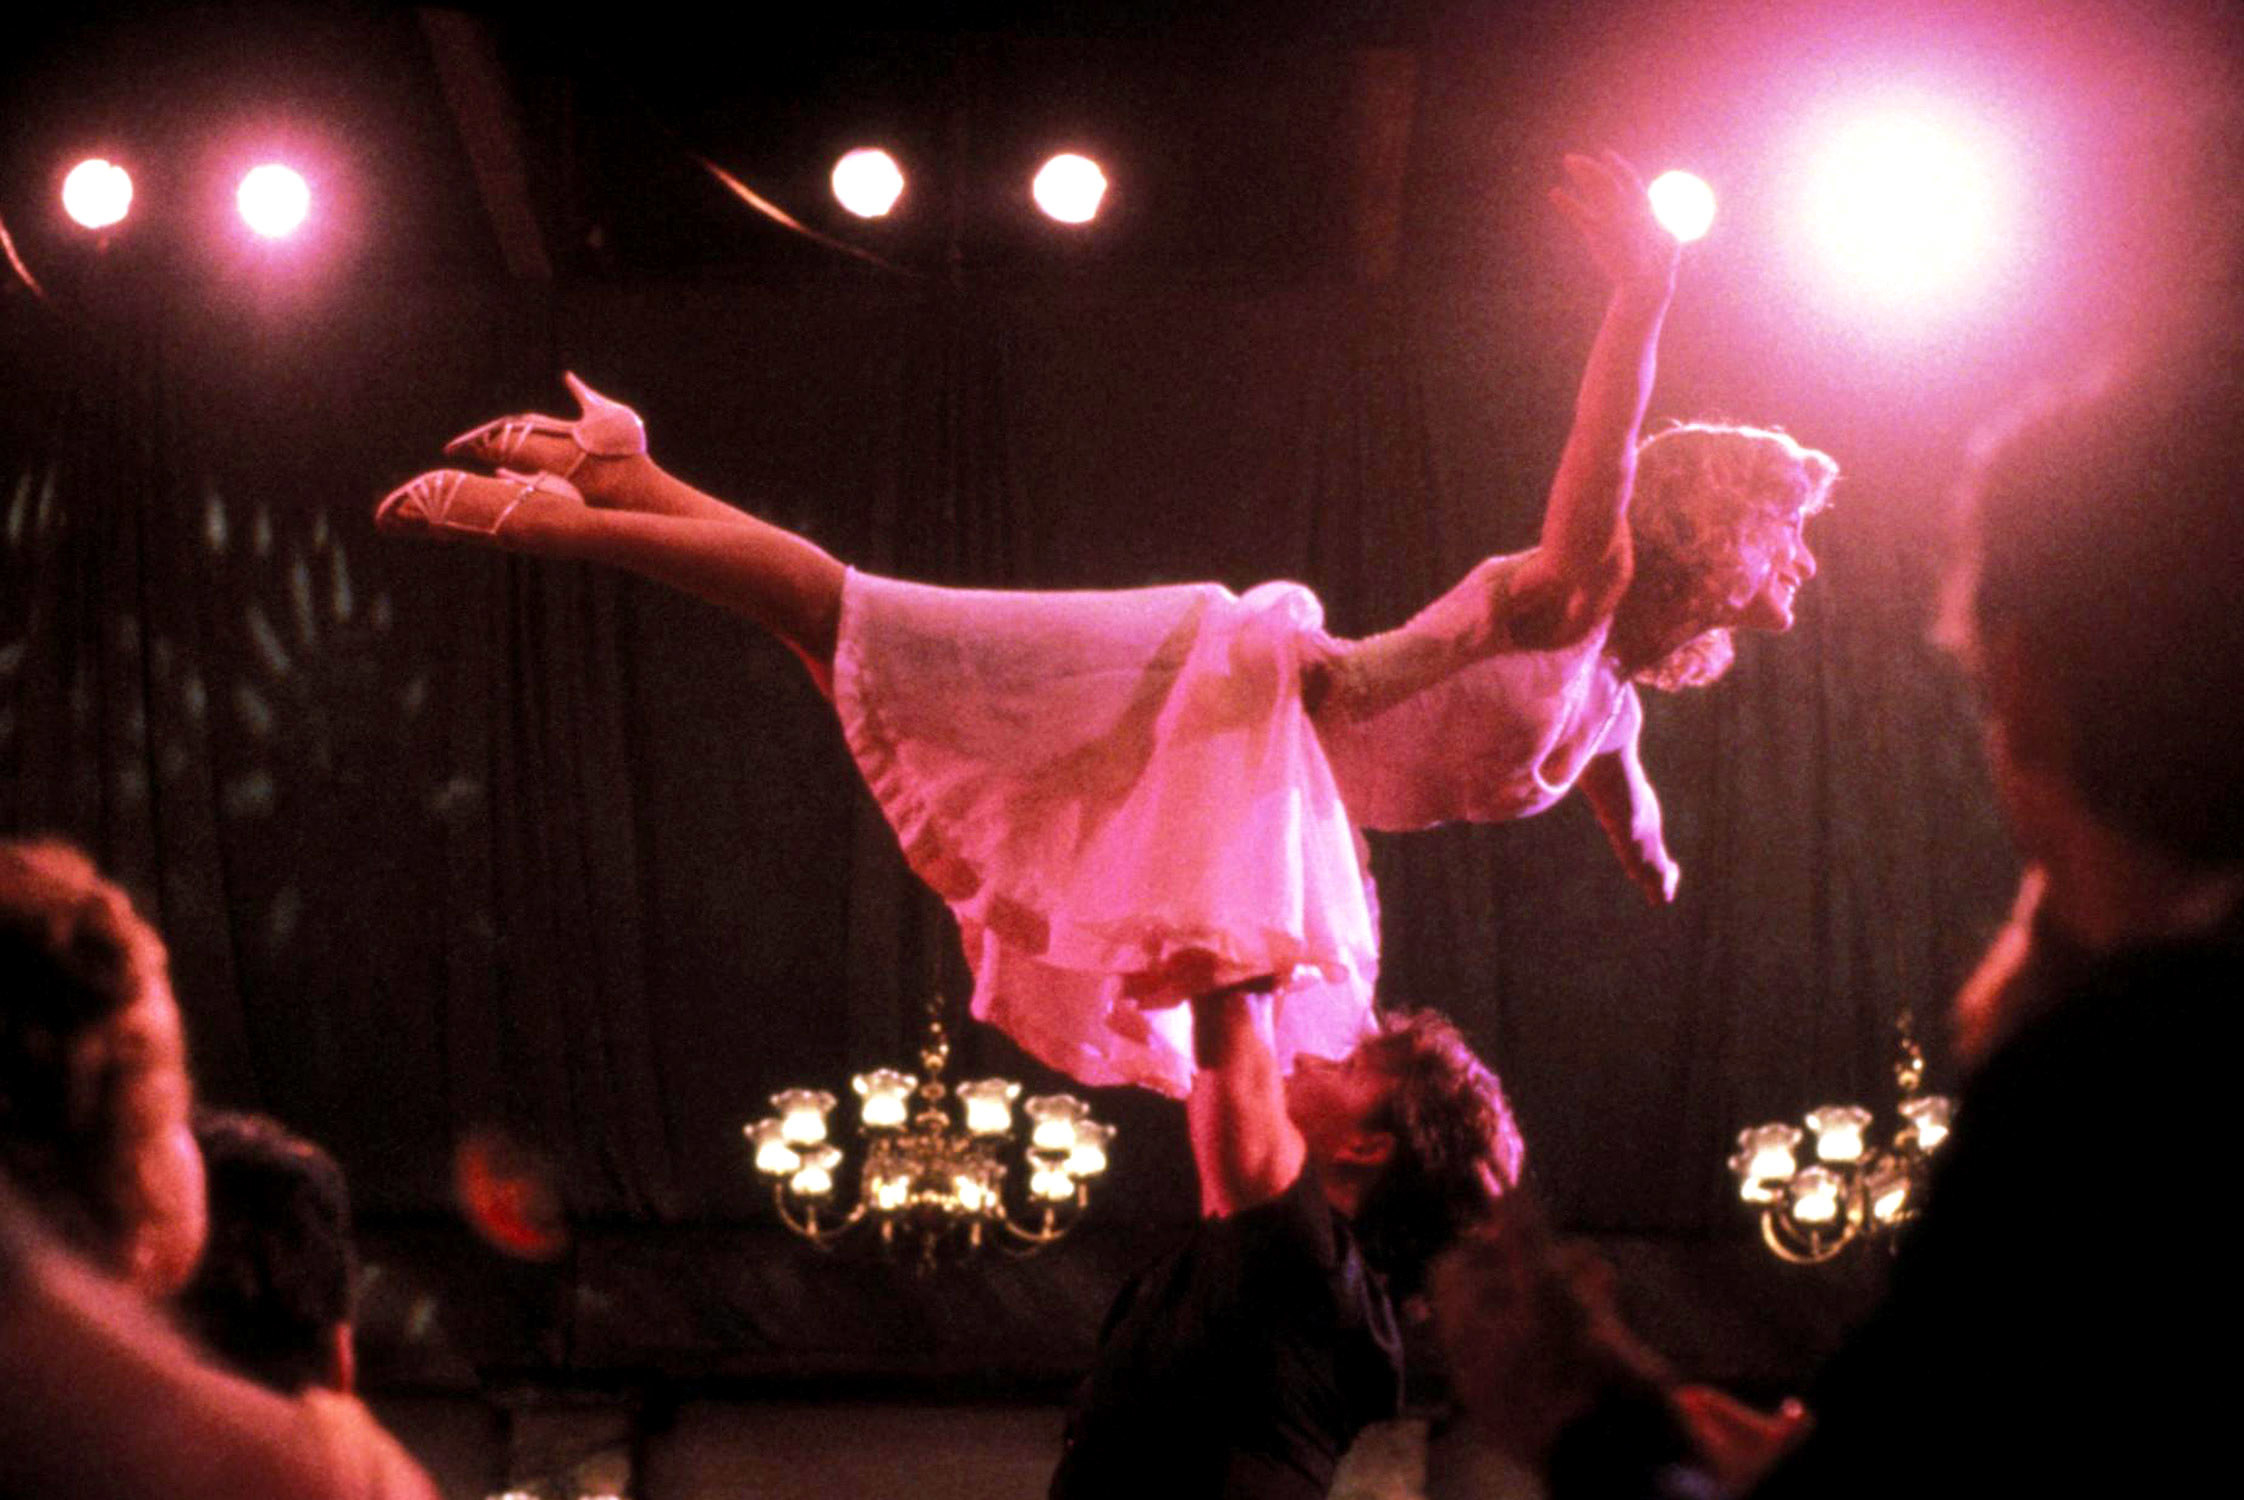 Jennfier Grey and Patrick Swayze in Dirty Dancing